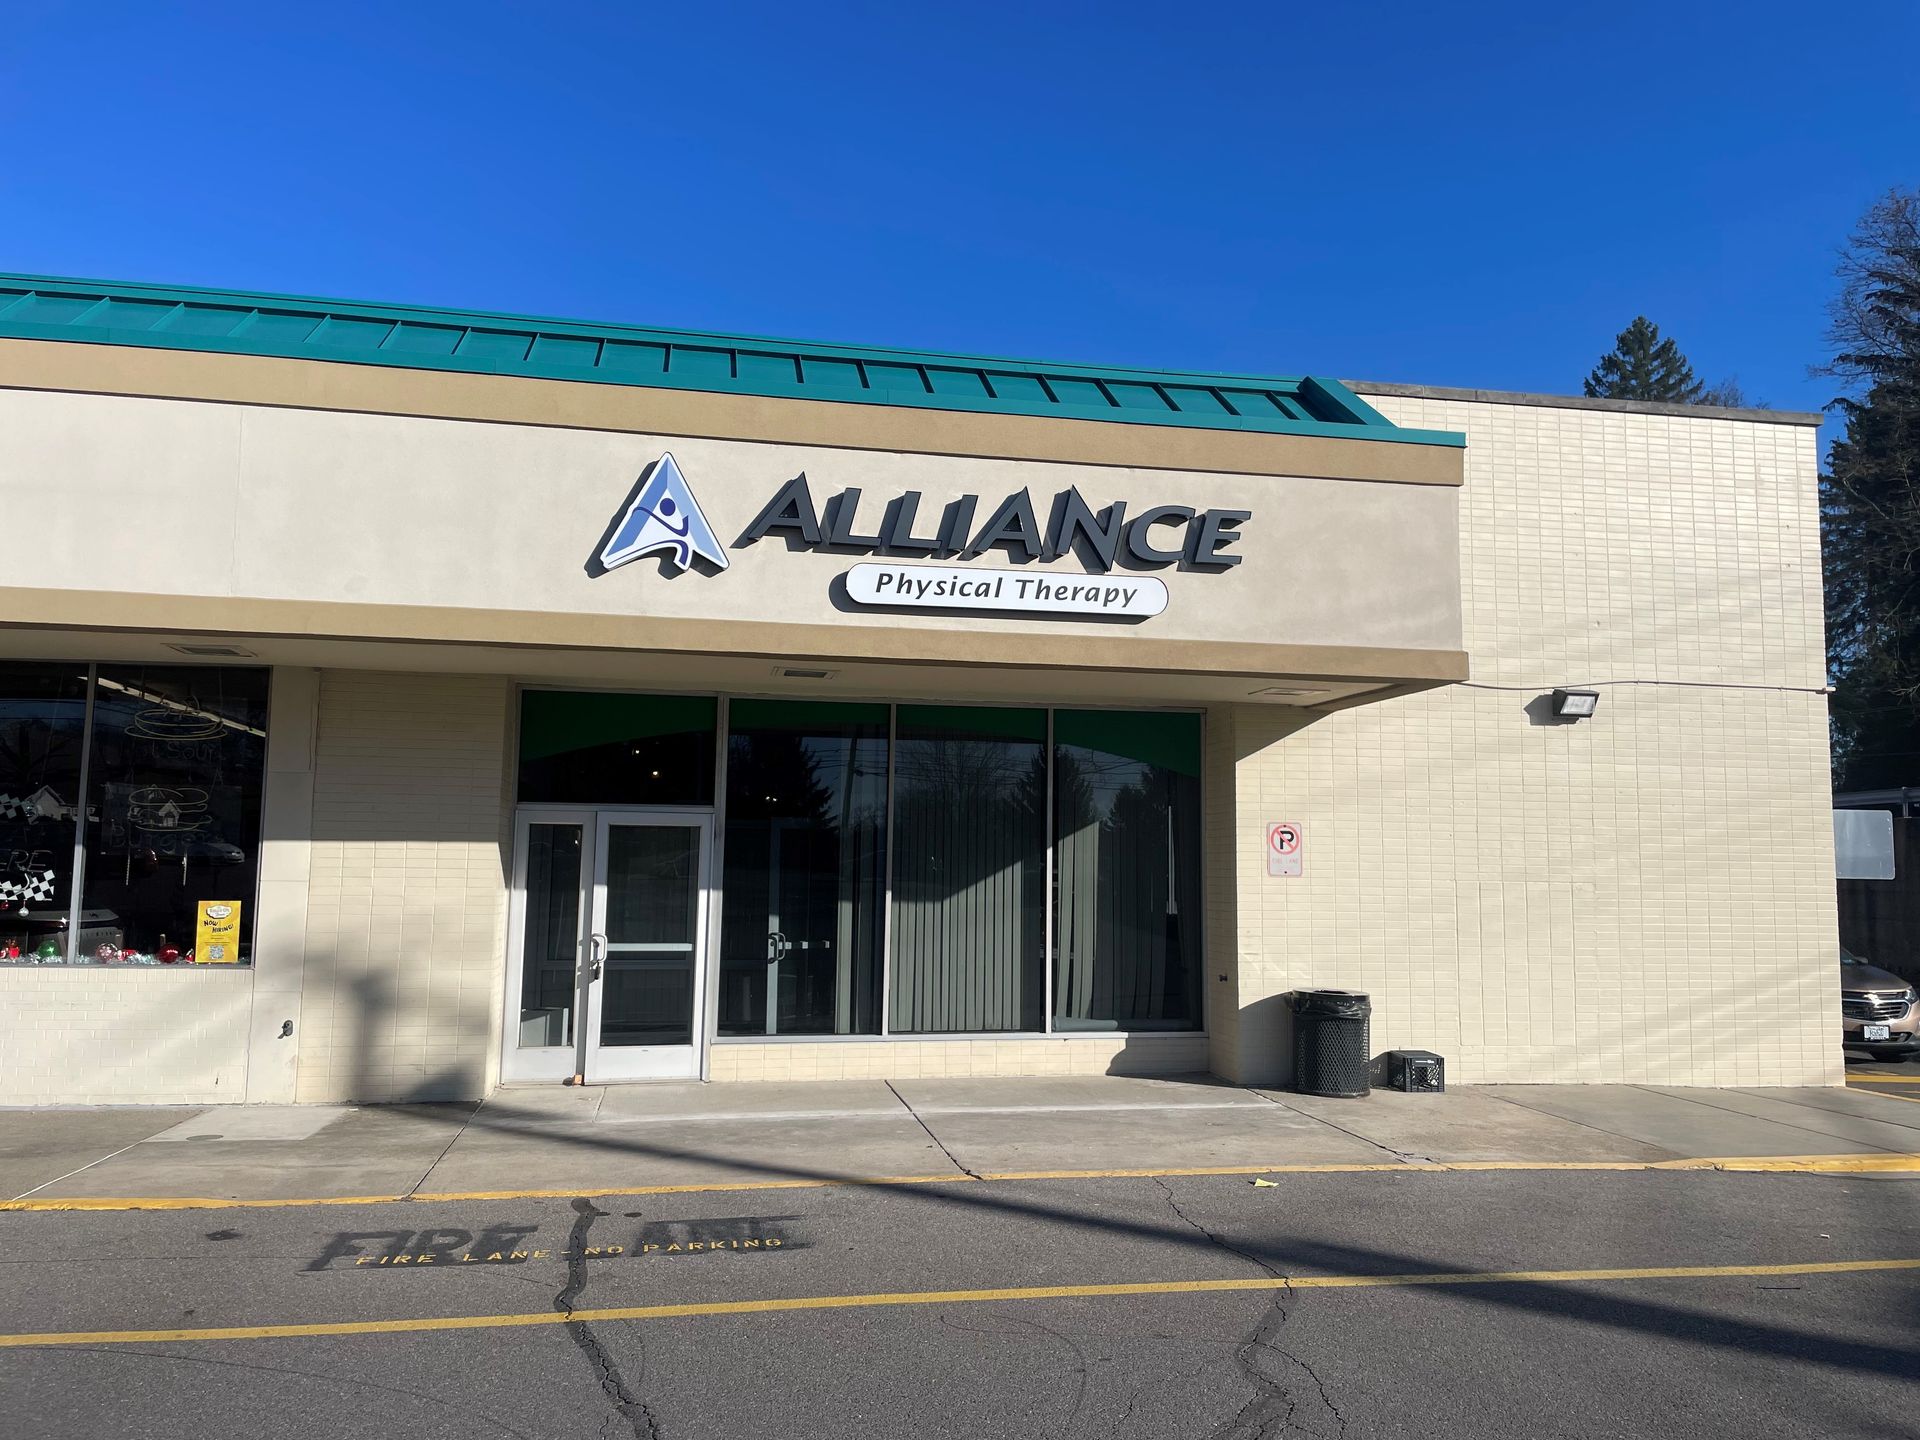 Ross Township/Pittsburgh Location -Ross Township/Pittsburgh, PA - Alliance Physical Therapy